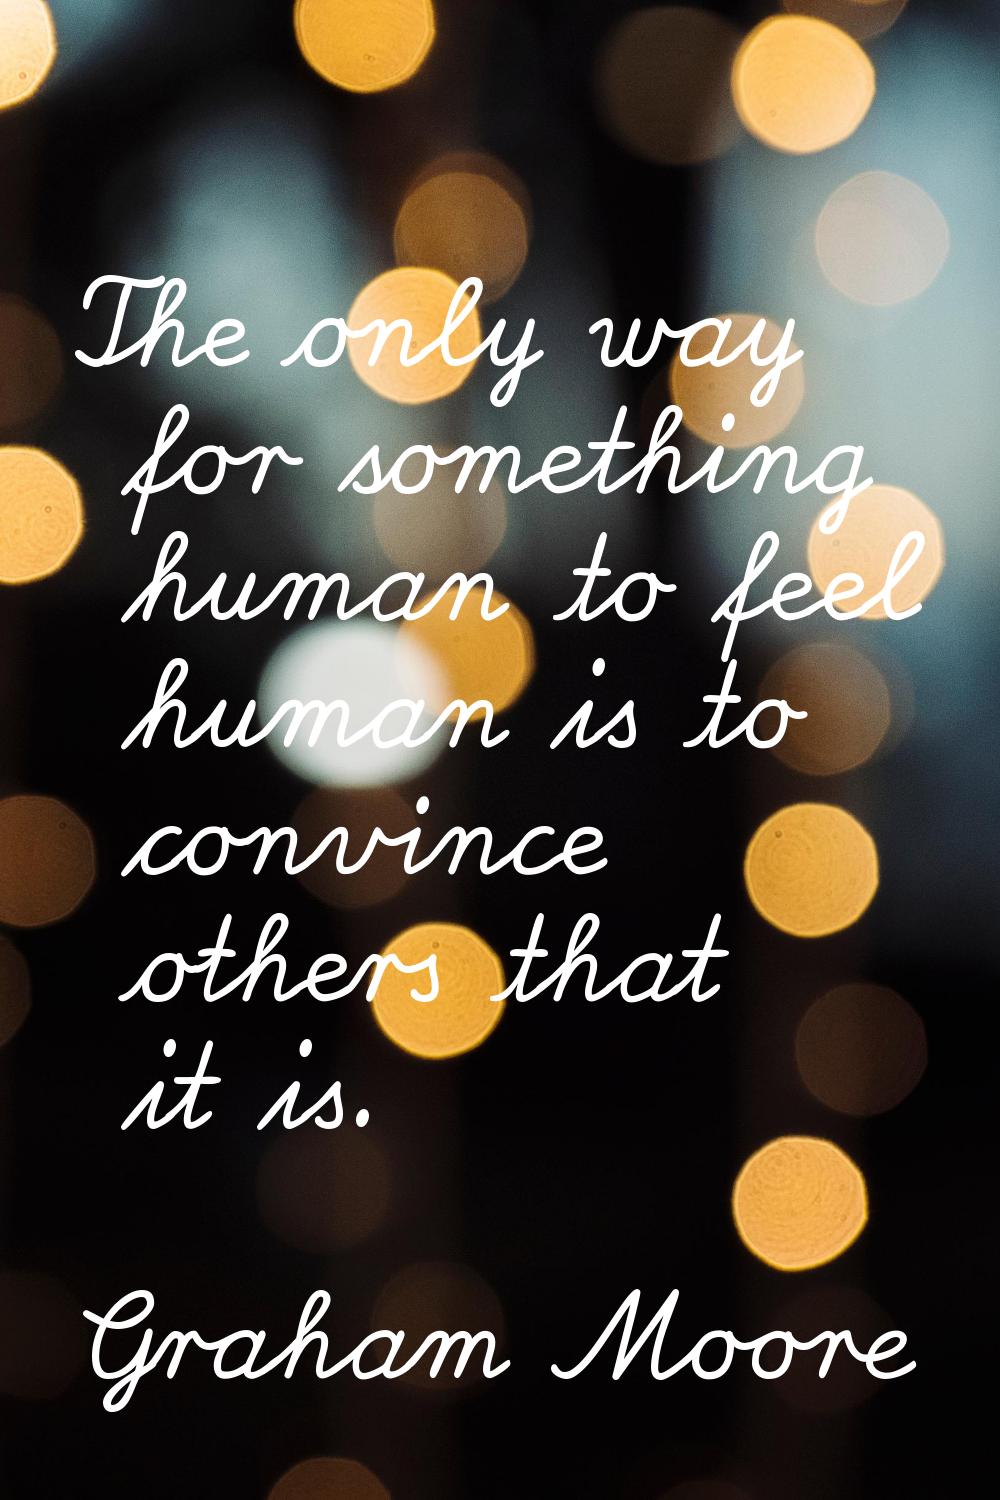 The only way for something human to feel human is to convince others that it is.